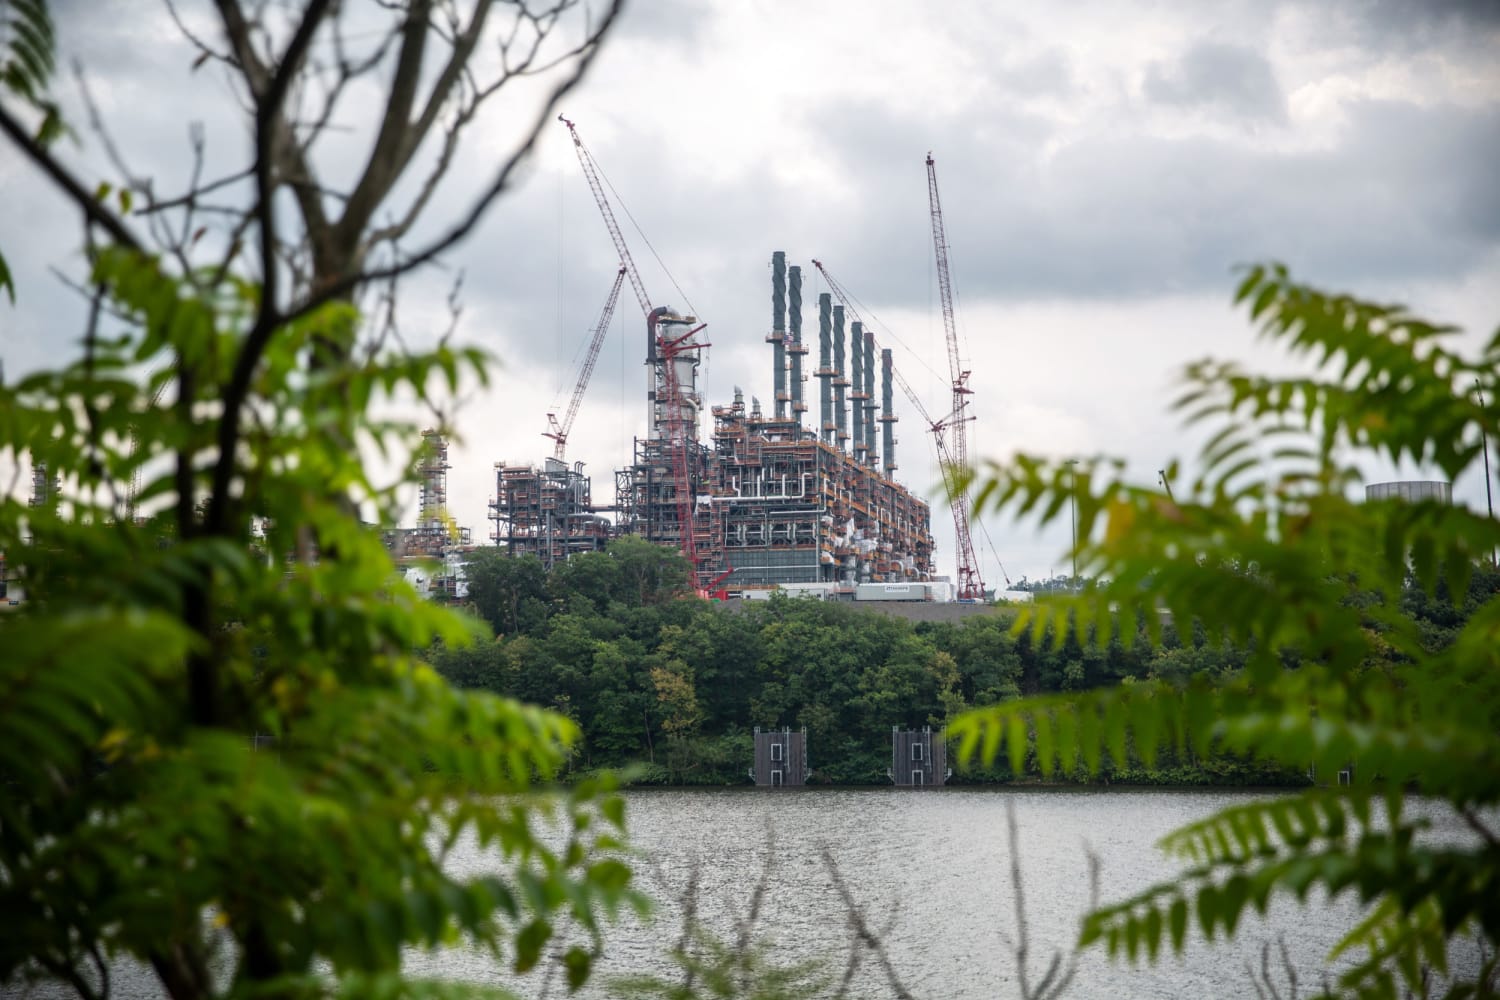 Months after residents sound the alarm, Pennsylvania ‘cracks’ down on Shell plant